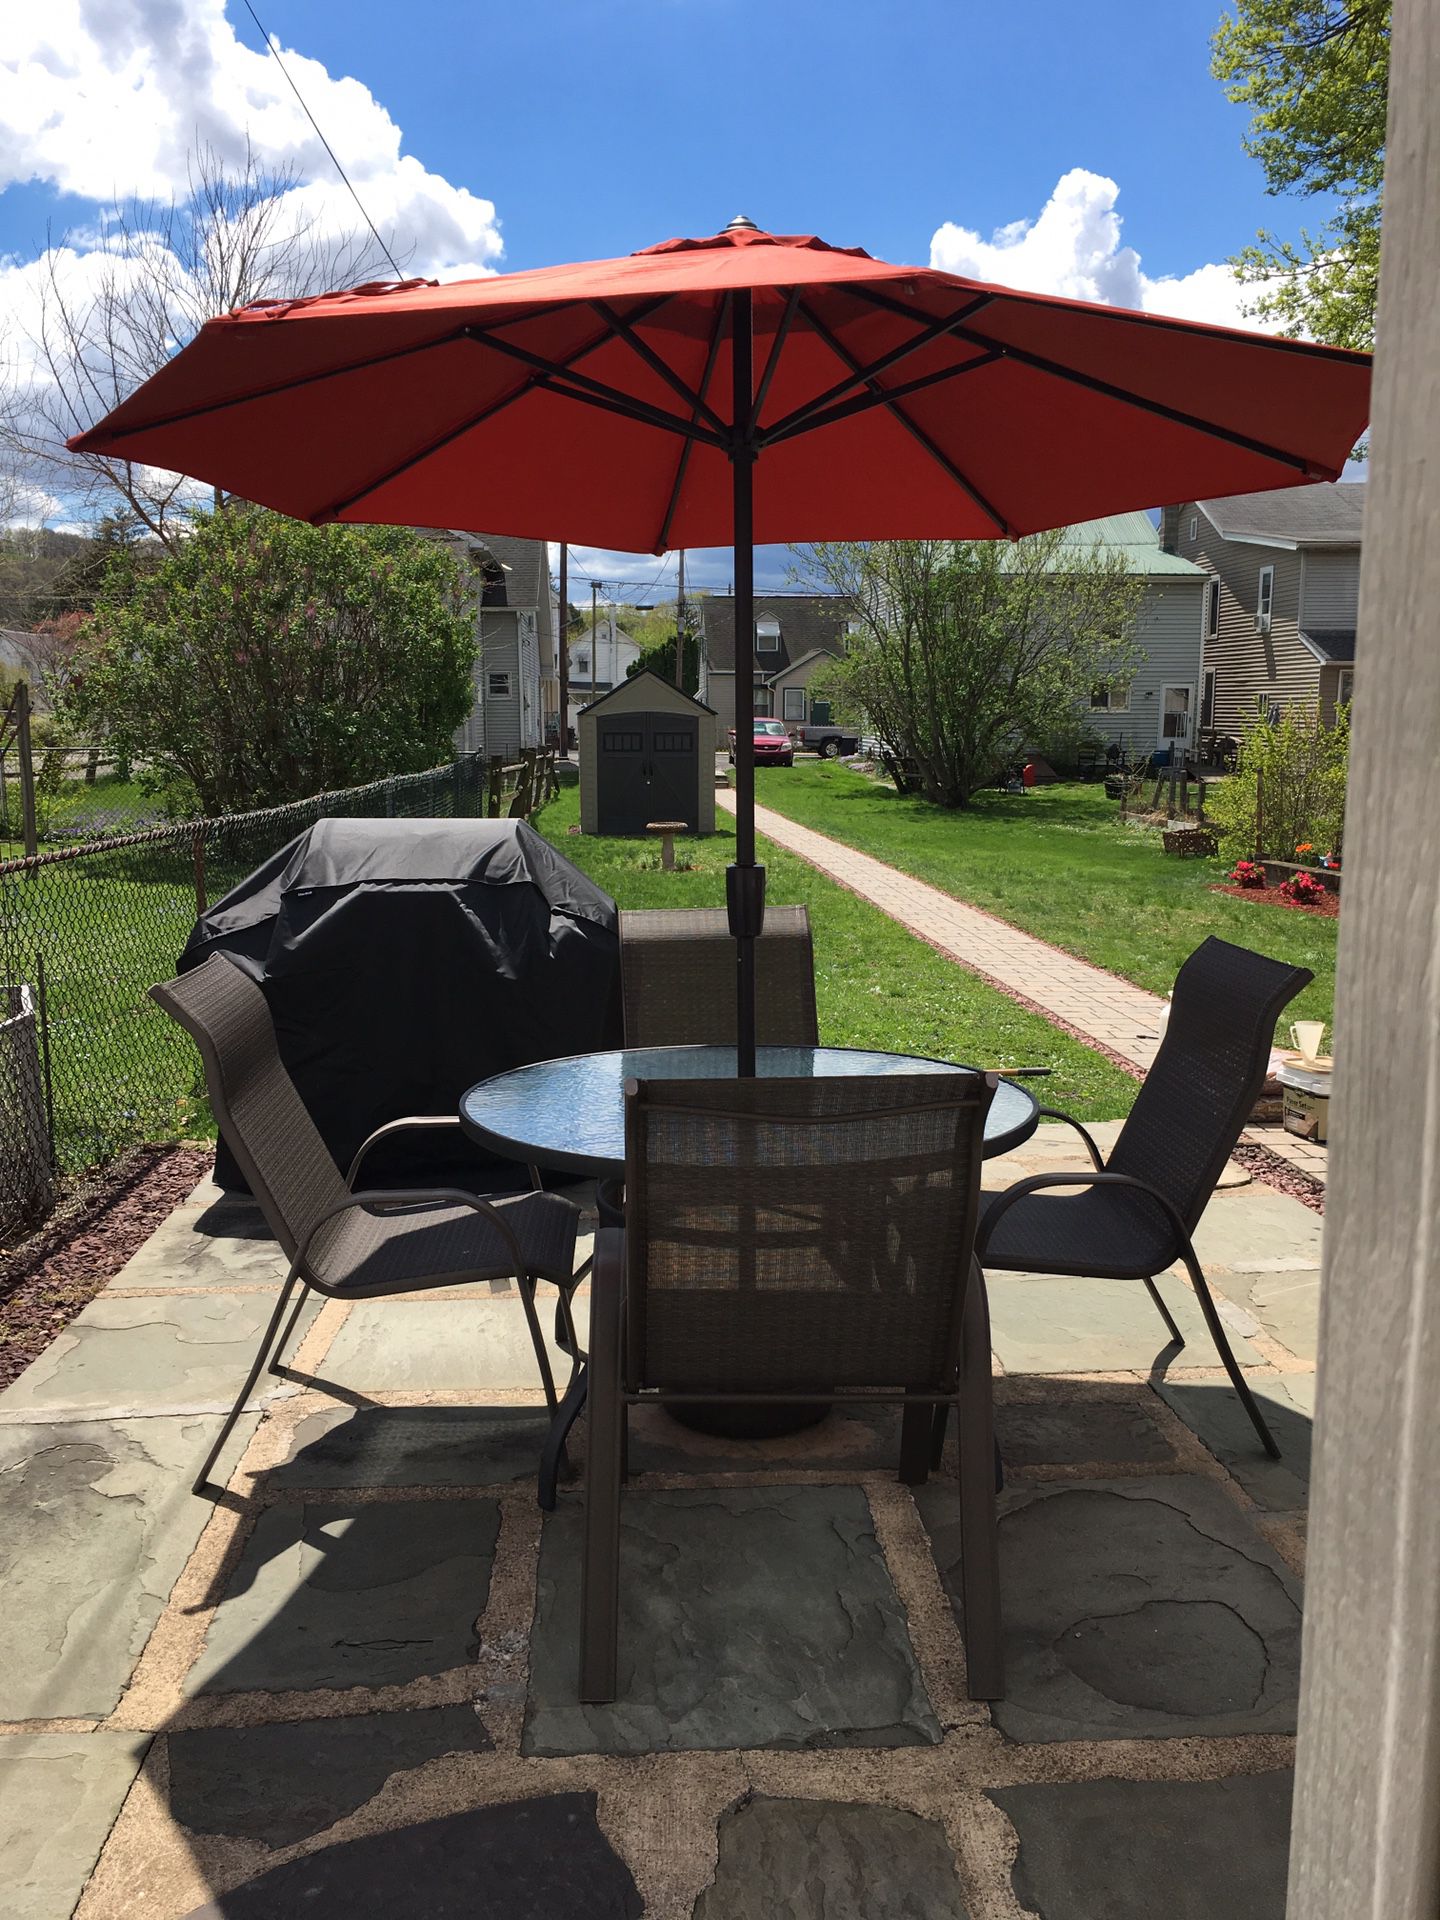 Outdoor Table. 4 Chairs. Umbrella with stand and cover. excellent condition. Umbrella is like new.